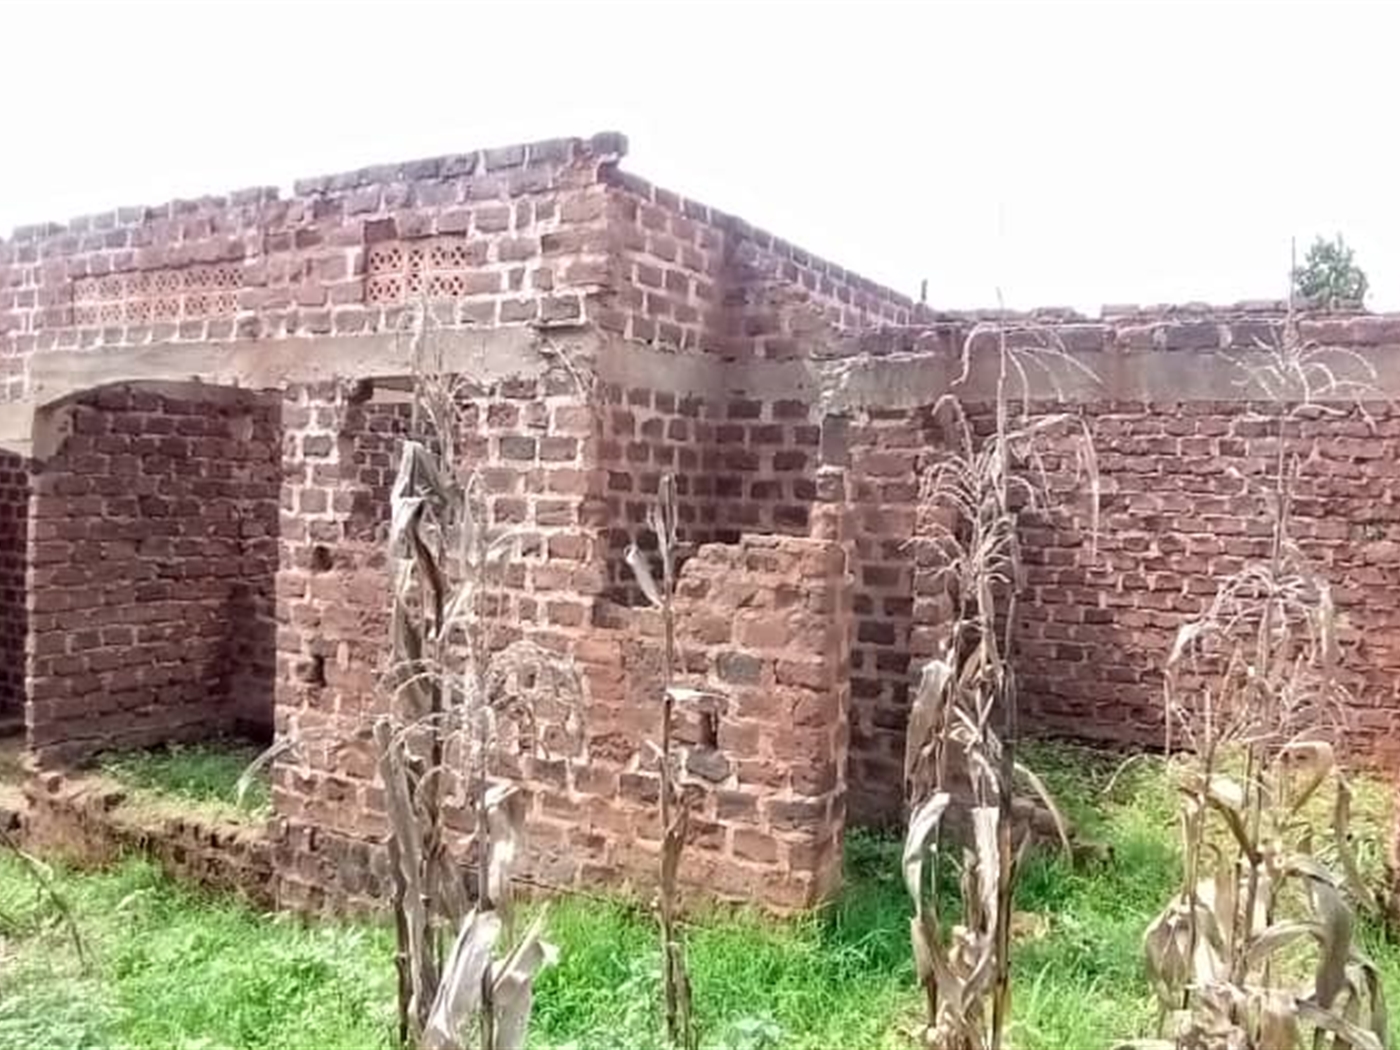 Rental units for sale in Mbalala Mukono